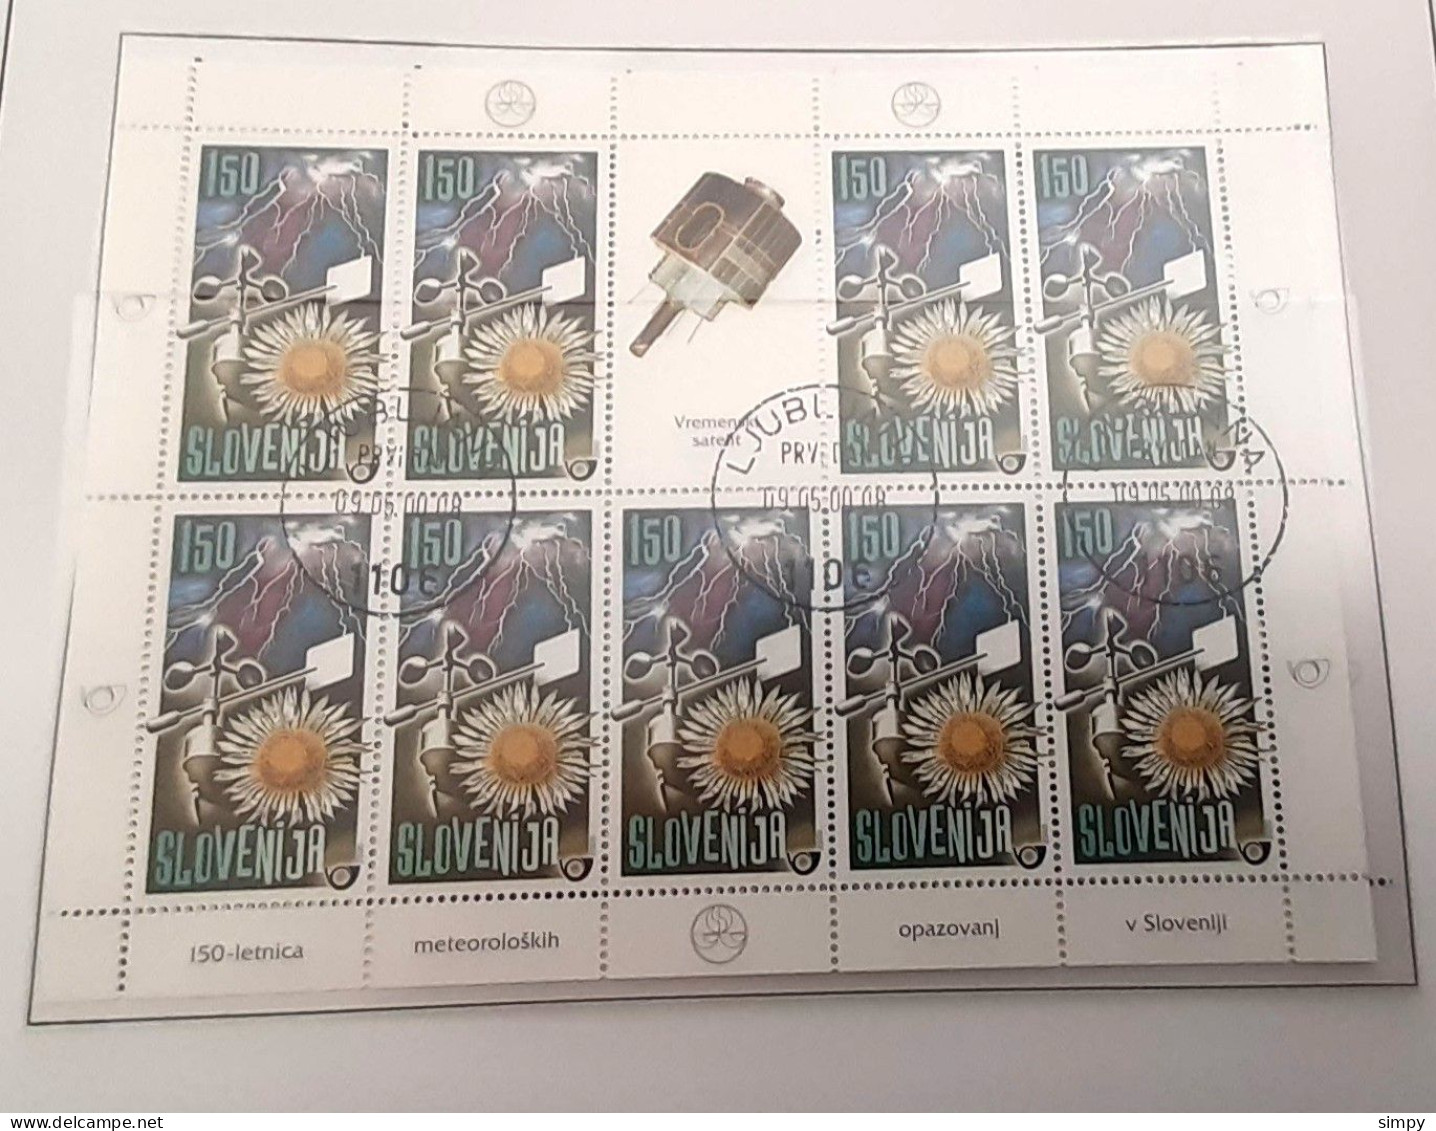 SLOVENIA 2000 150th Anniversary Of Meteorological Measurements Sheetlet Mala Pola Used Stamps Michel 312 - Slovénie